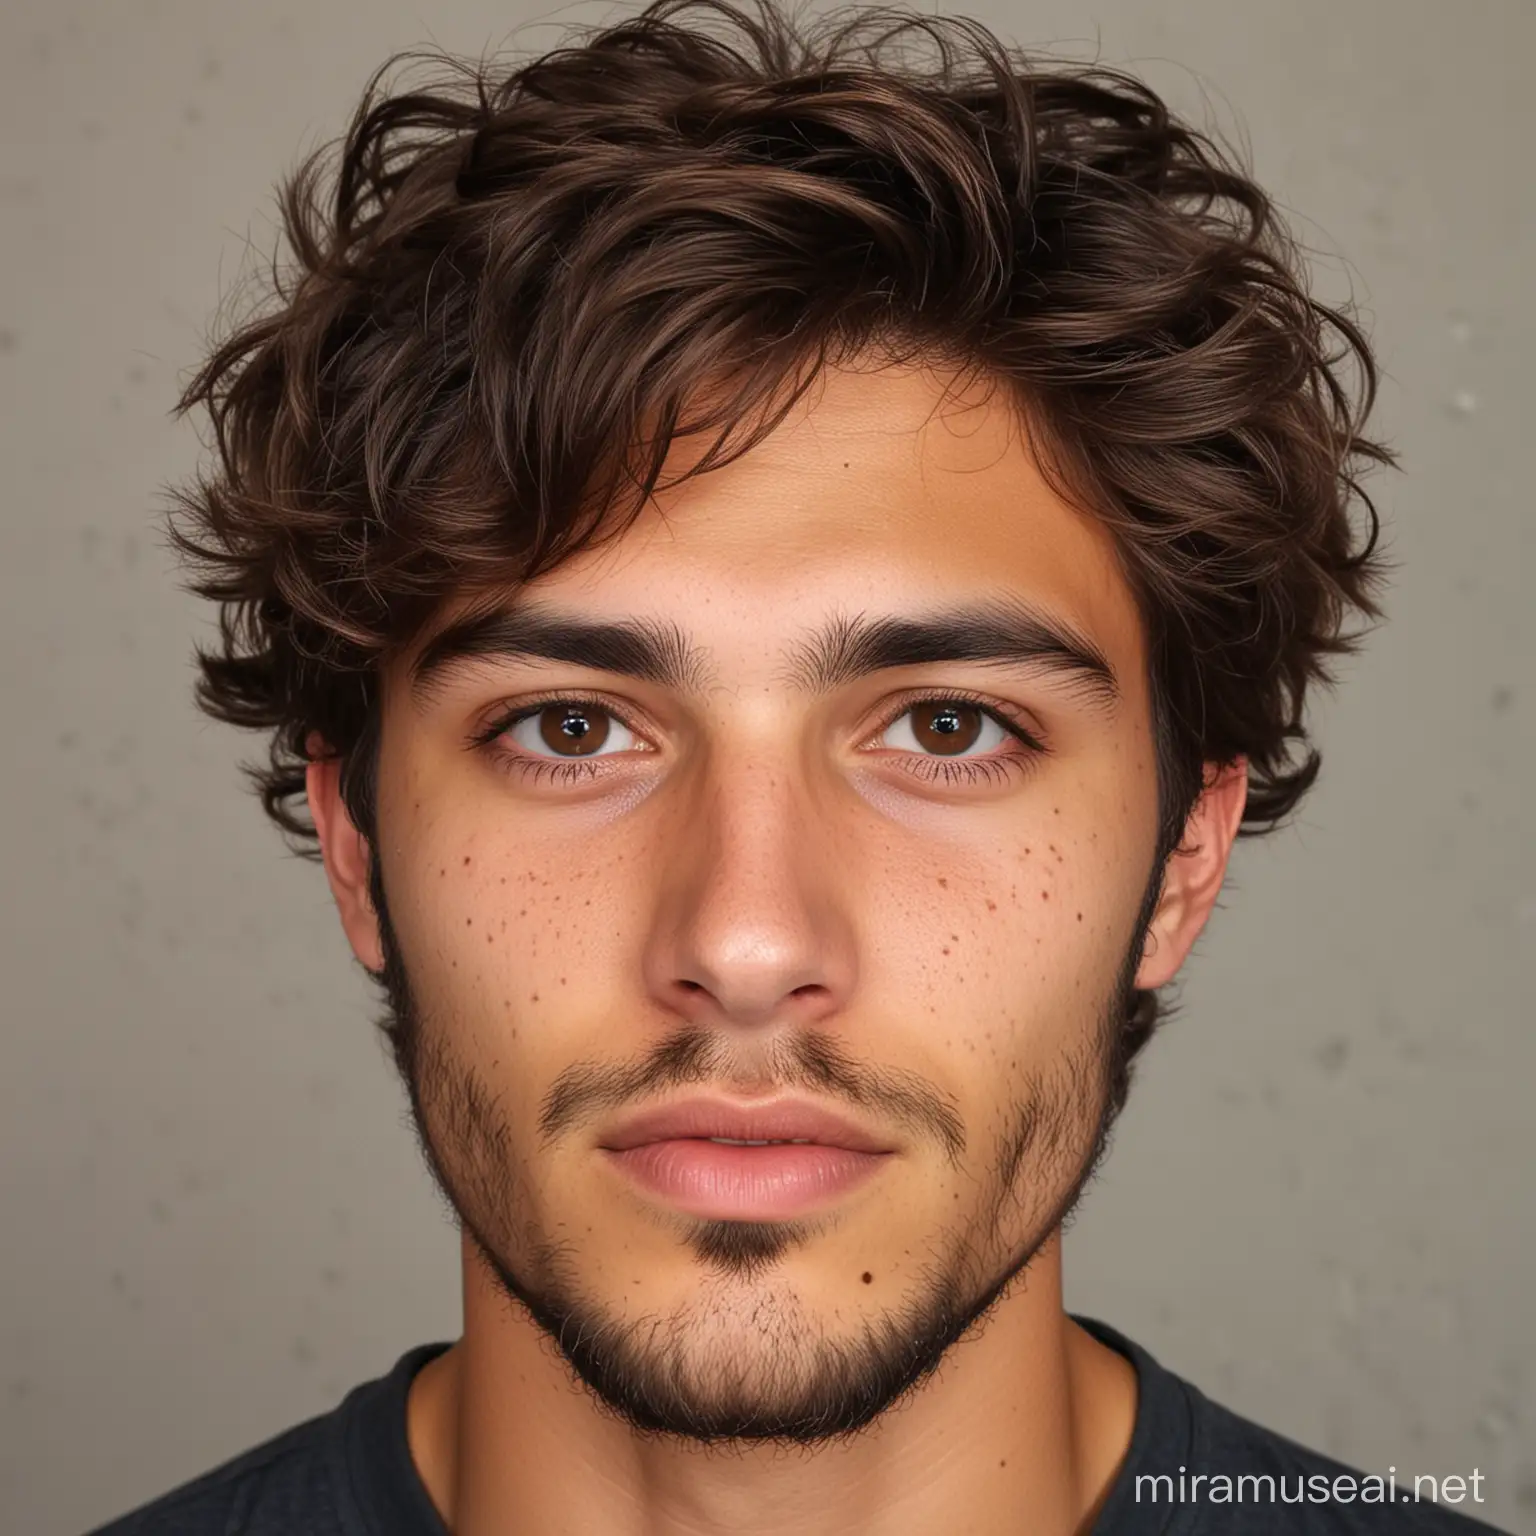 Young Man with Wavy Hair and Unkempt Beard in Natural Light Portrait